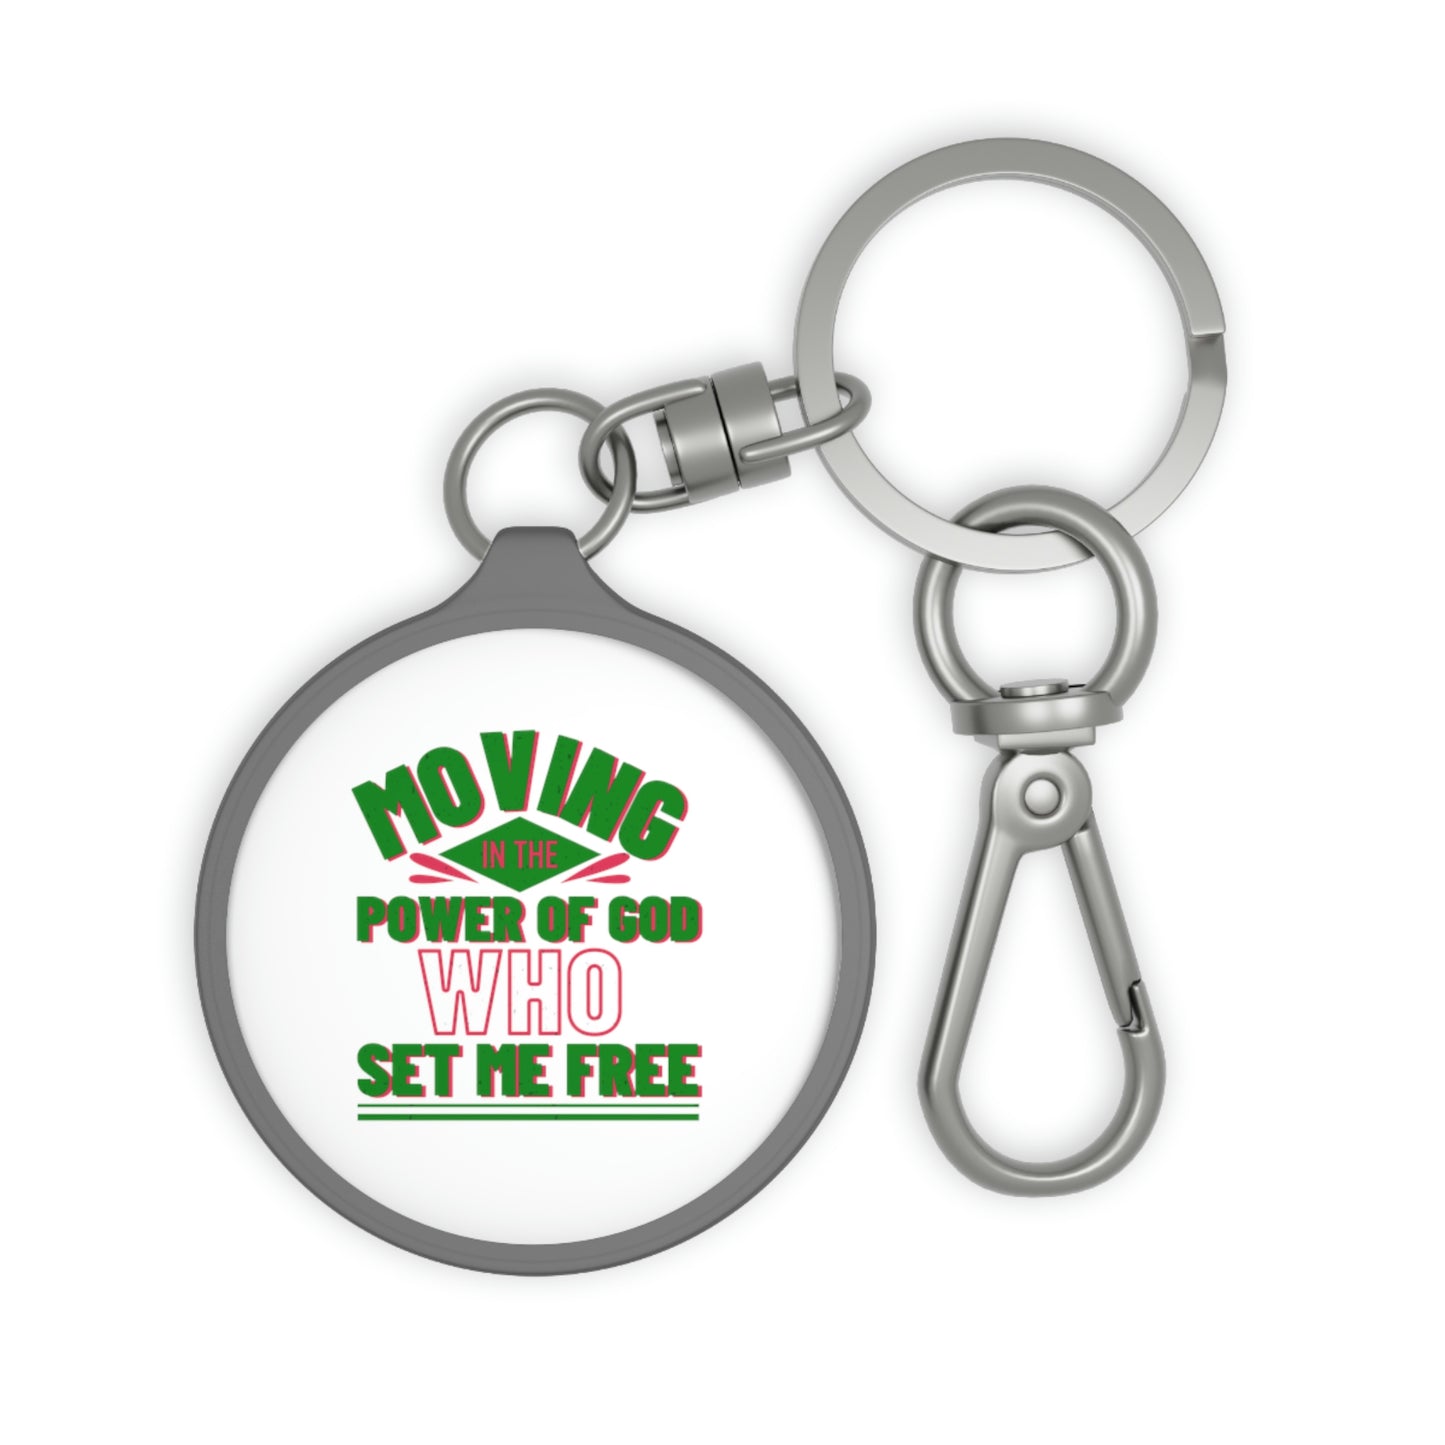 Moving In The Power Of God Who Set Me Free Key Fob